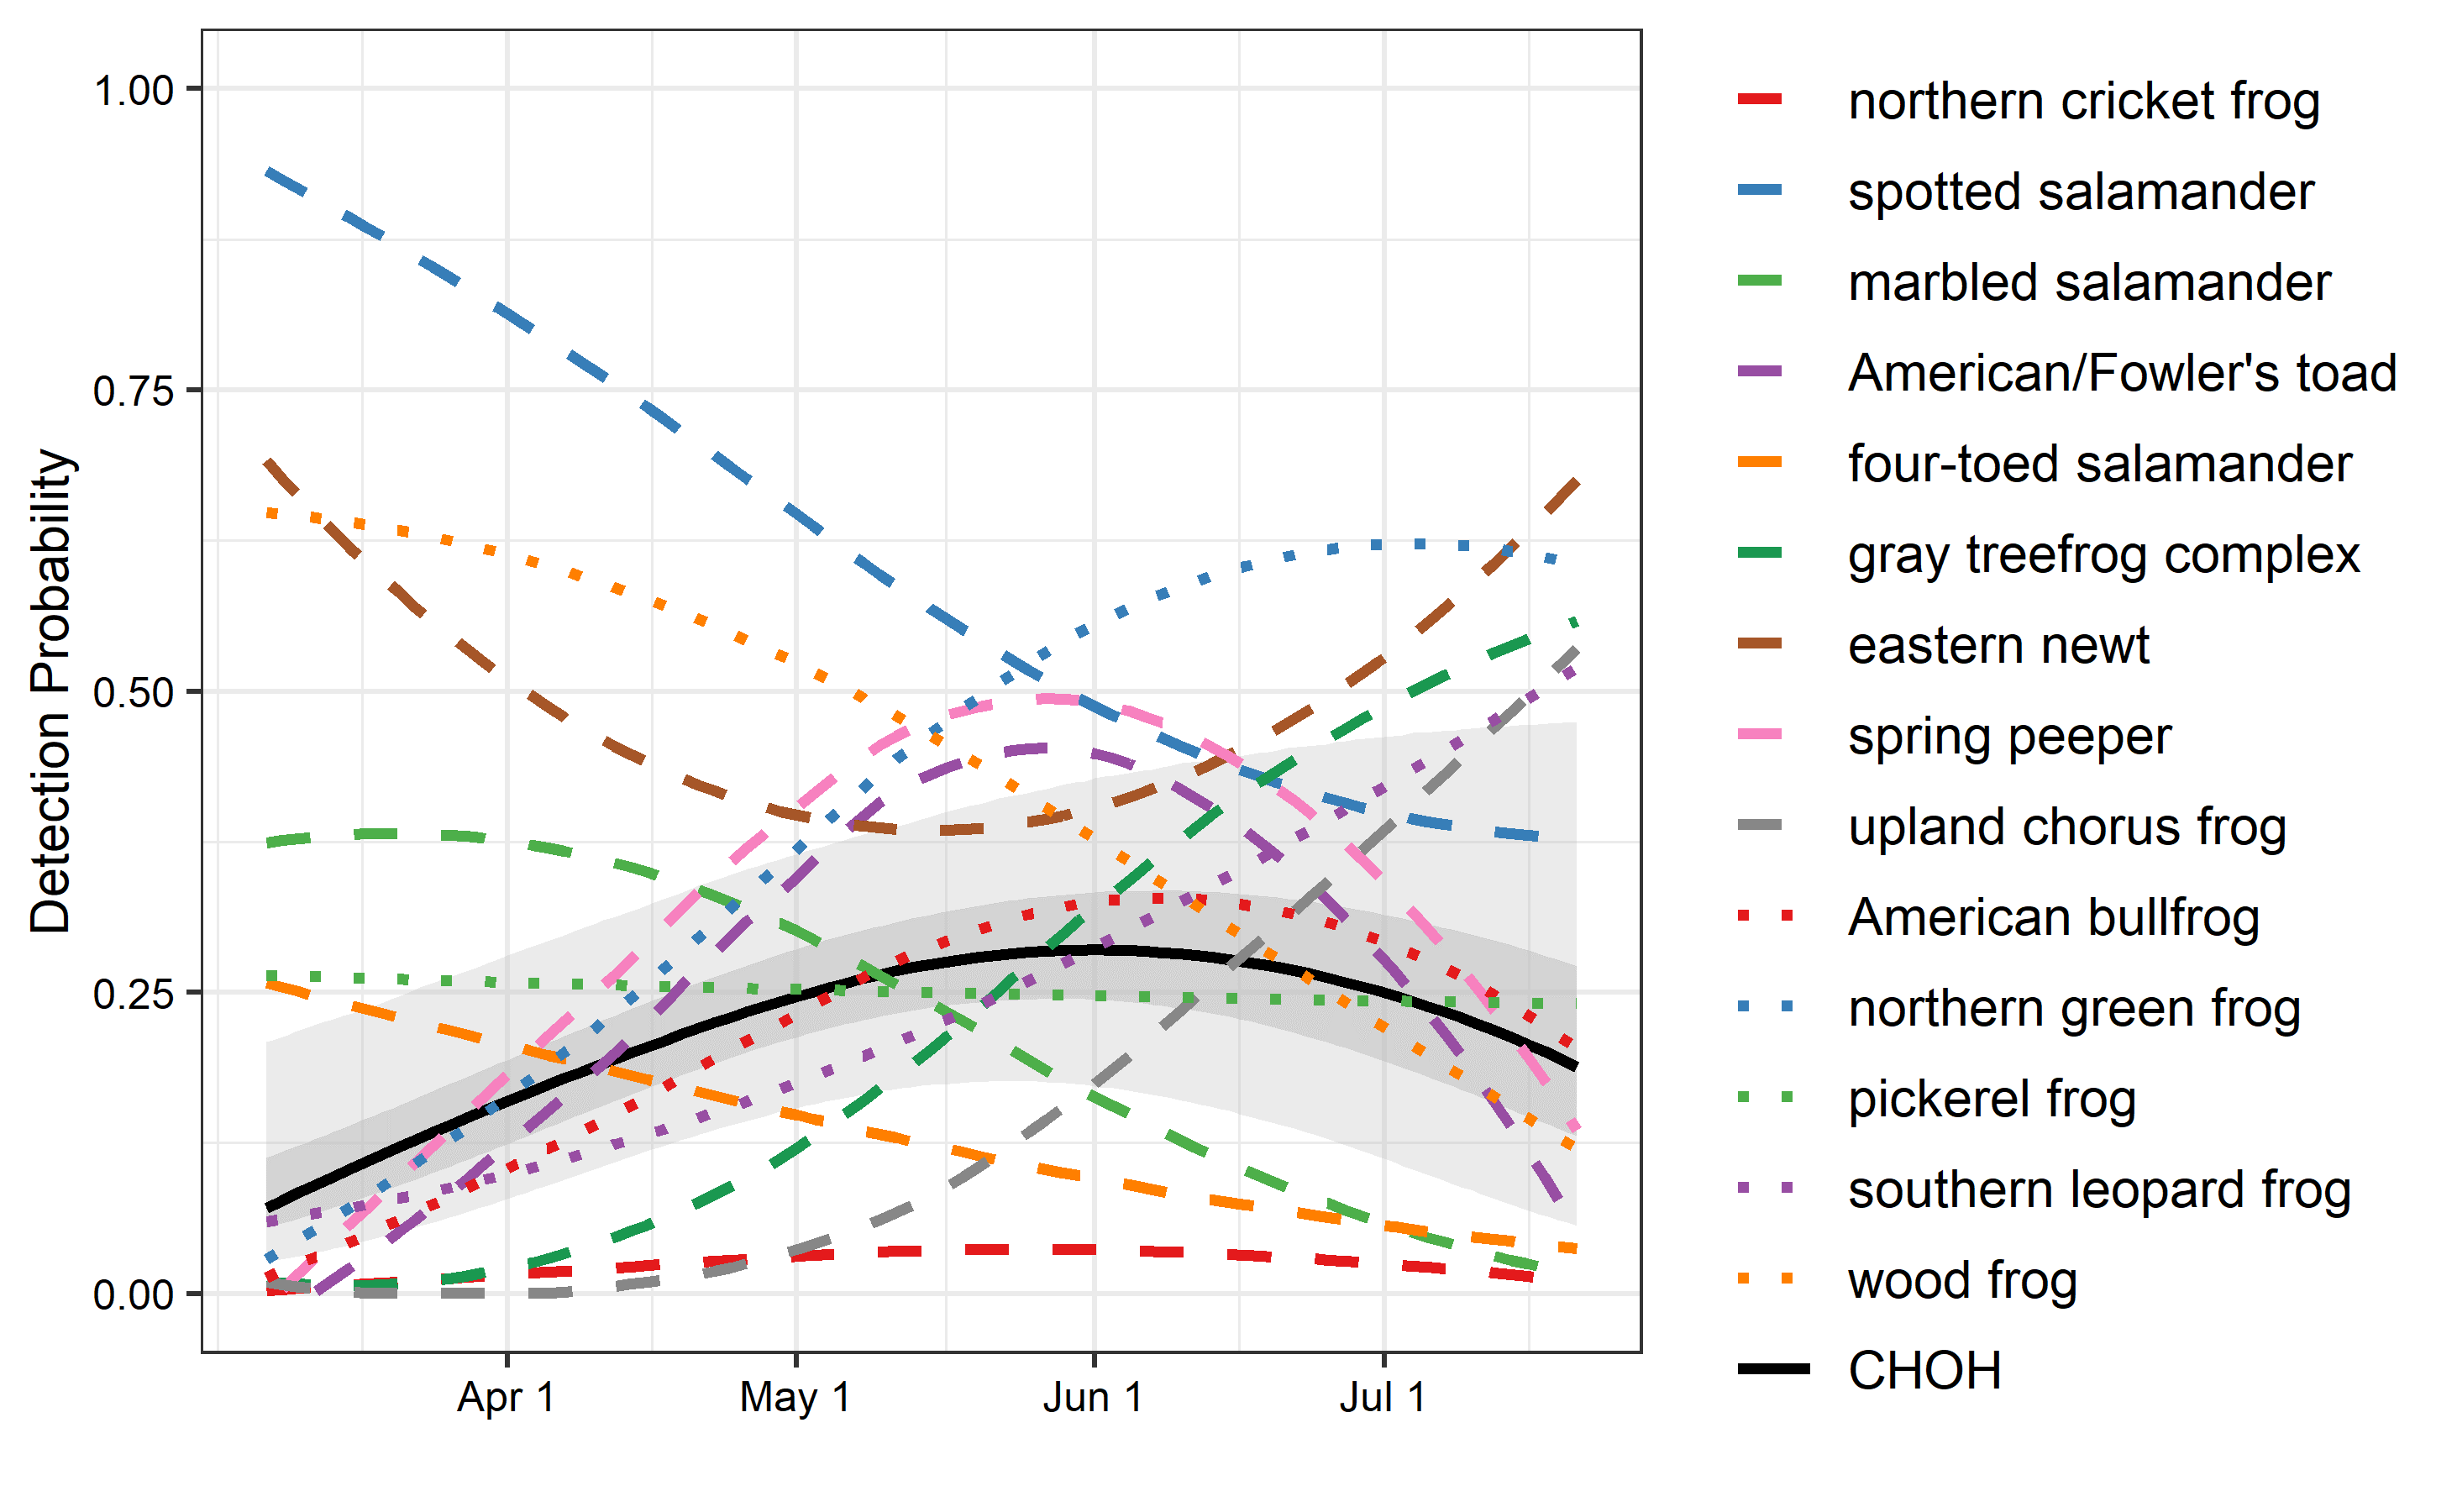 A graph showing probability of detecting various amphibian species from April through July in National Capital Area national parks.